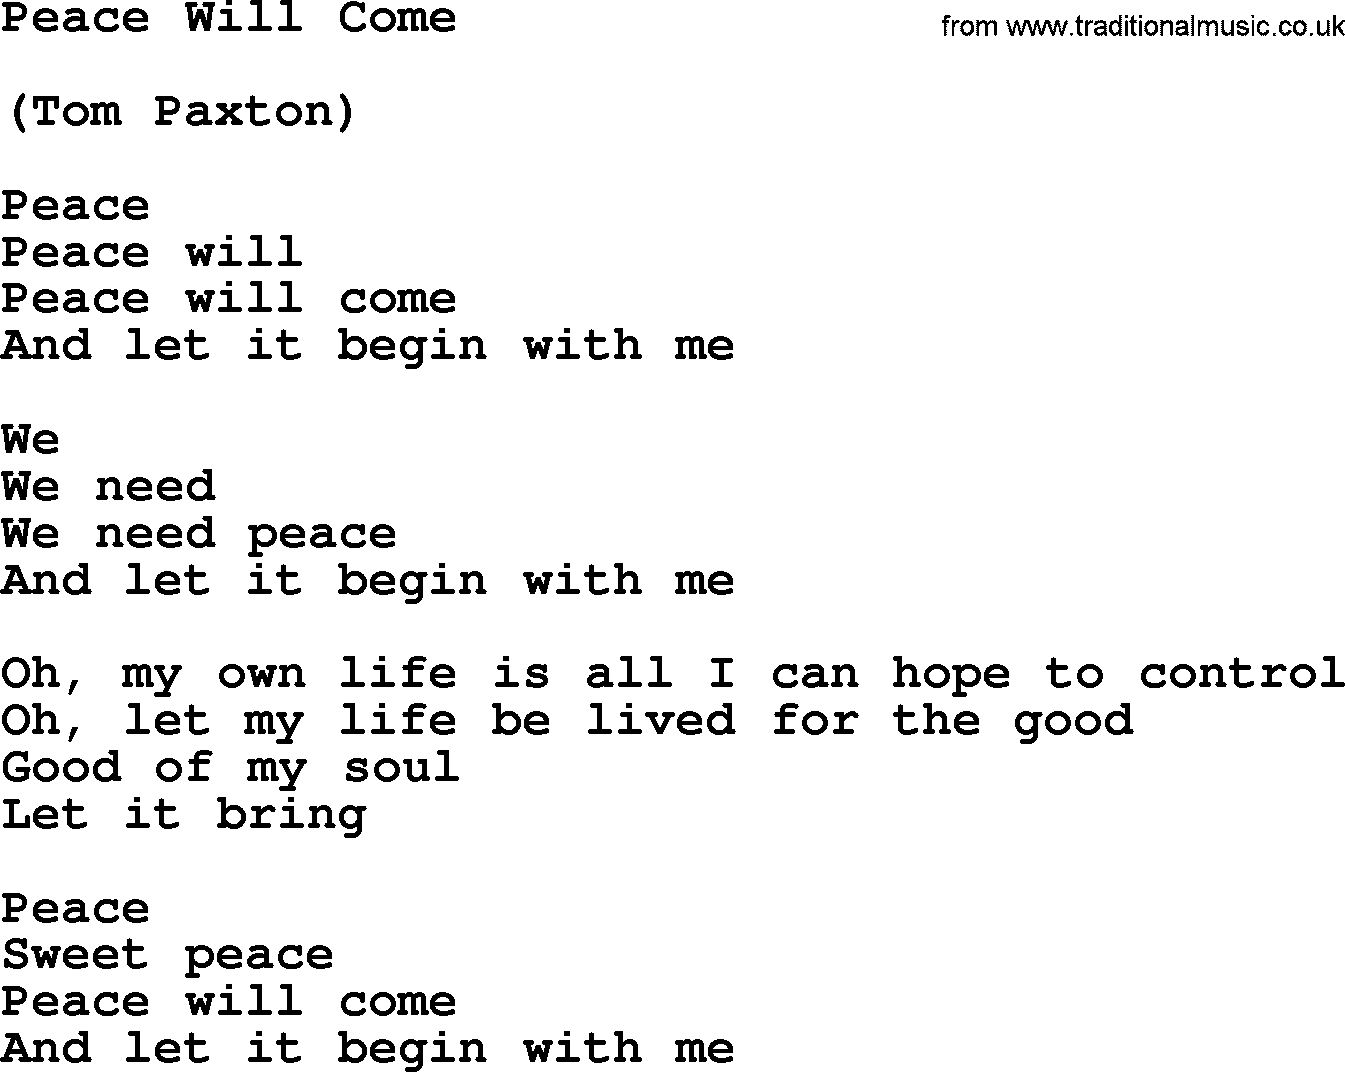 Tom Paxton song: Peace Will Come, lyrics